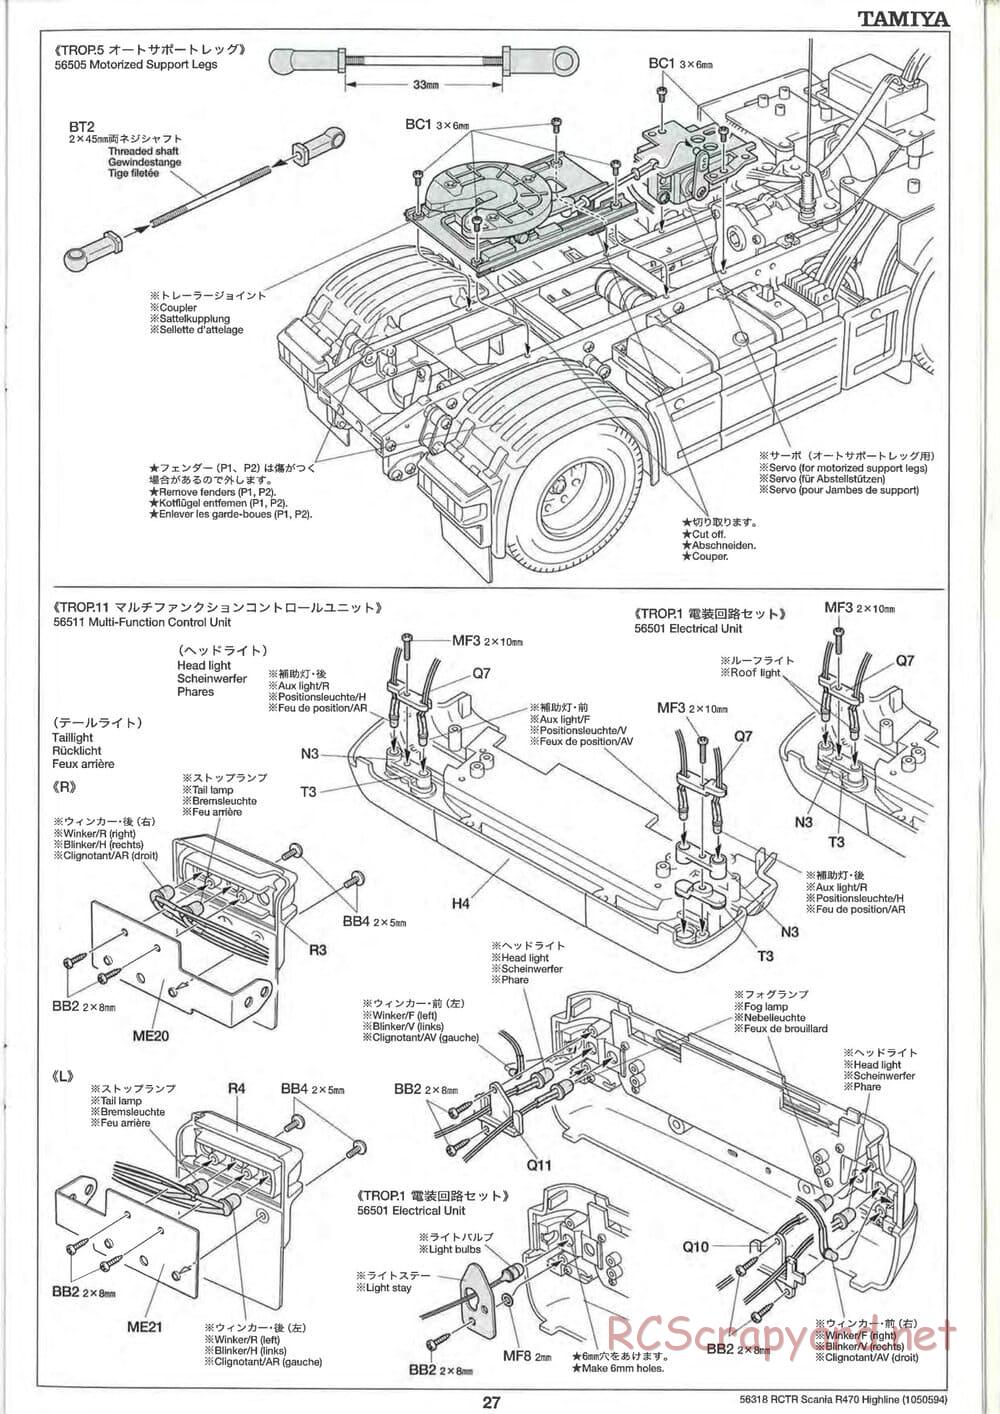 Tamiya - Scania R470 Highline Tractor Truck Chassis - Manual - Page 27